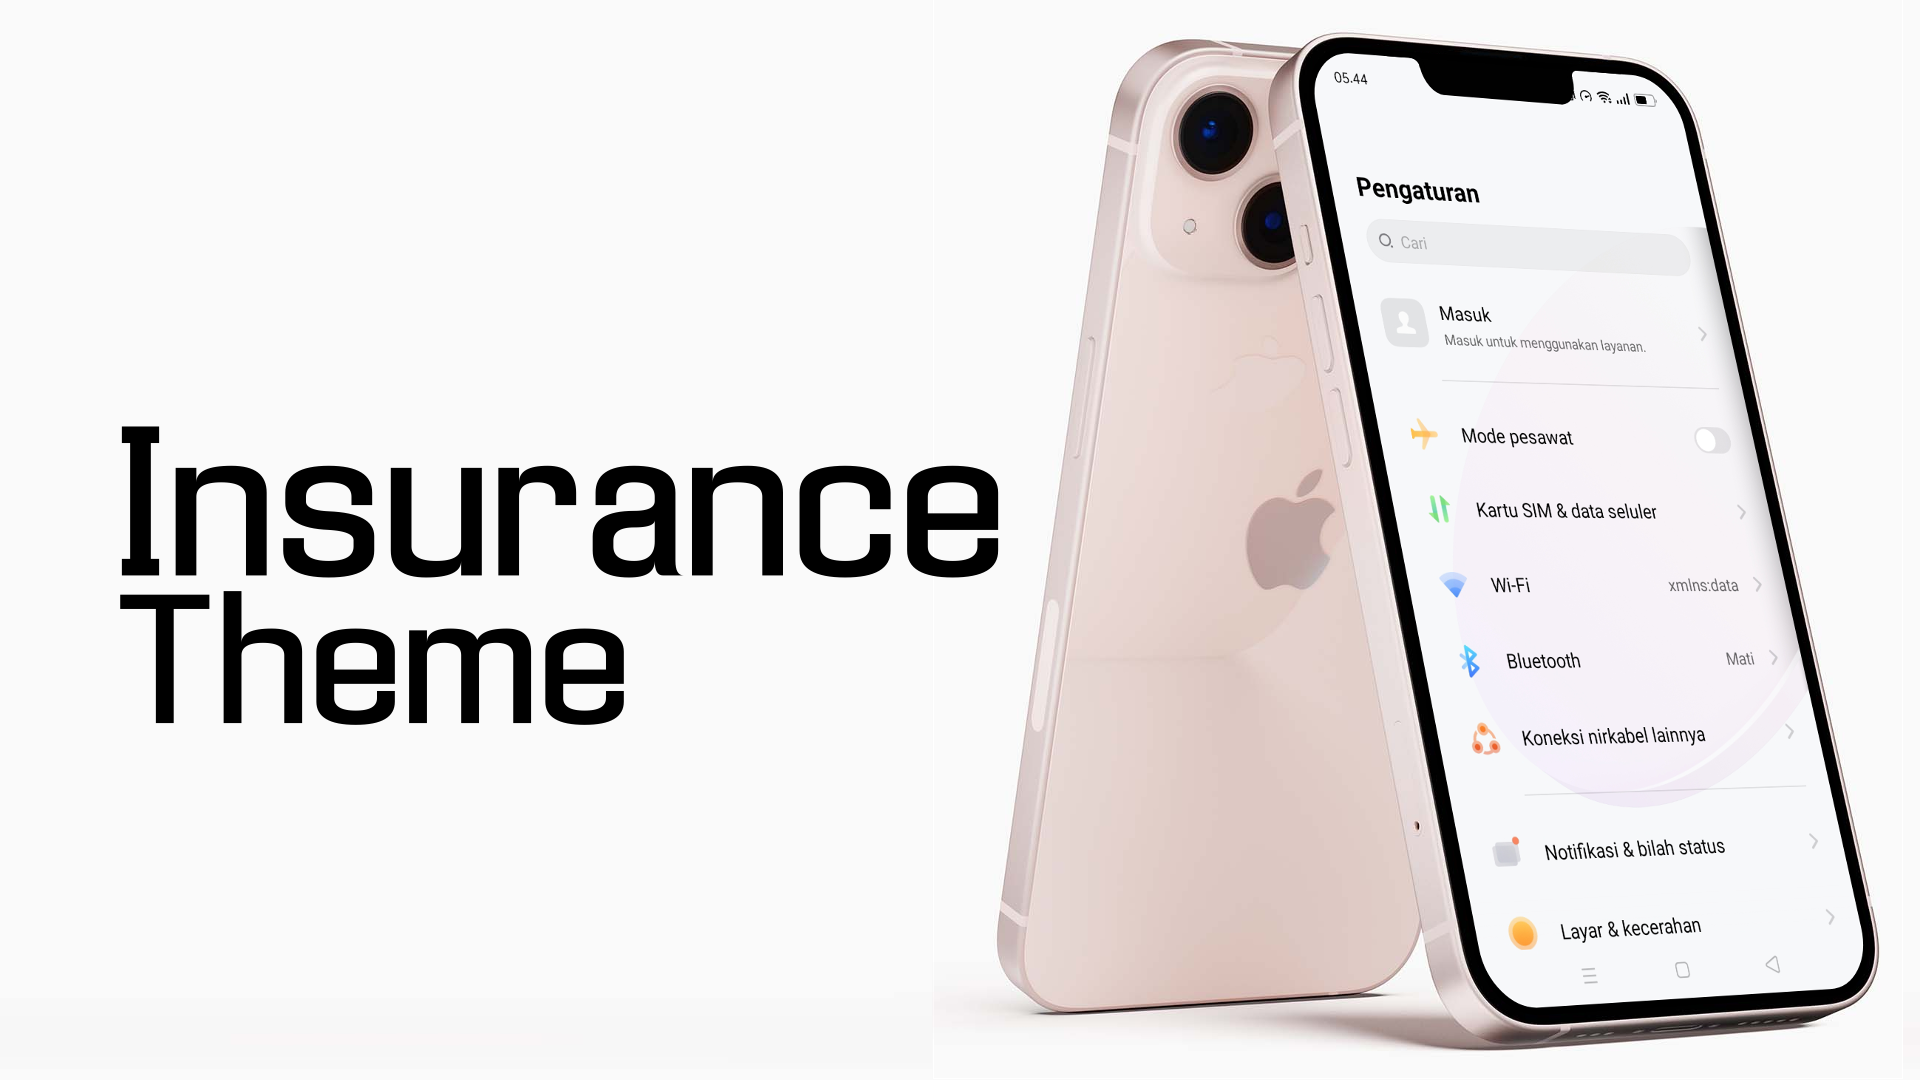 Insurance theme picture